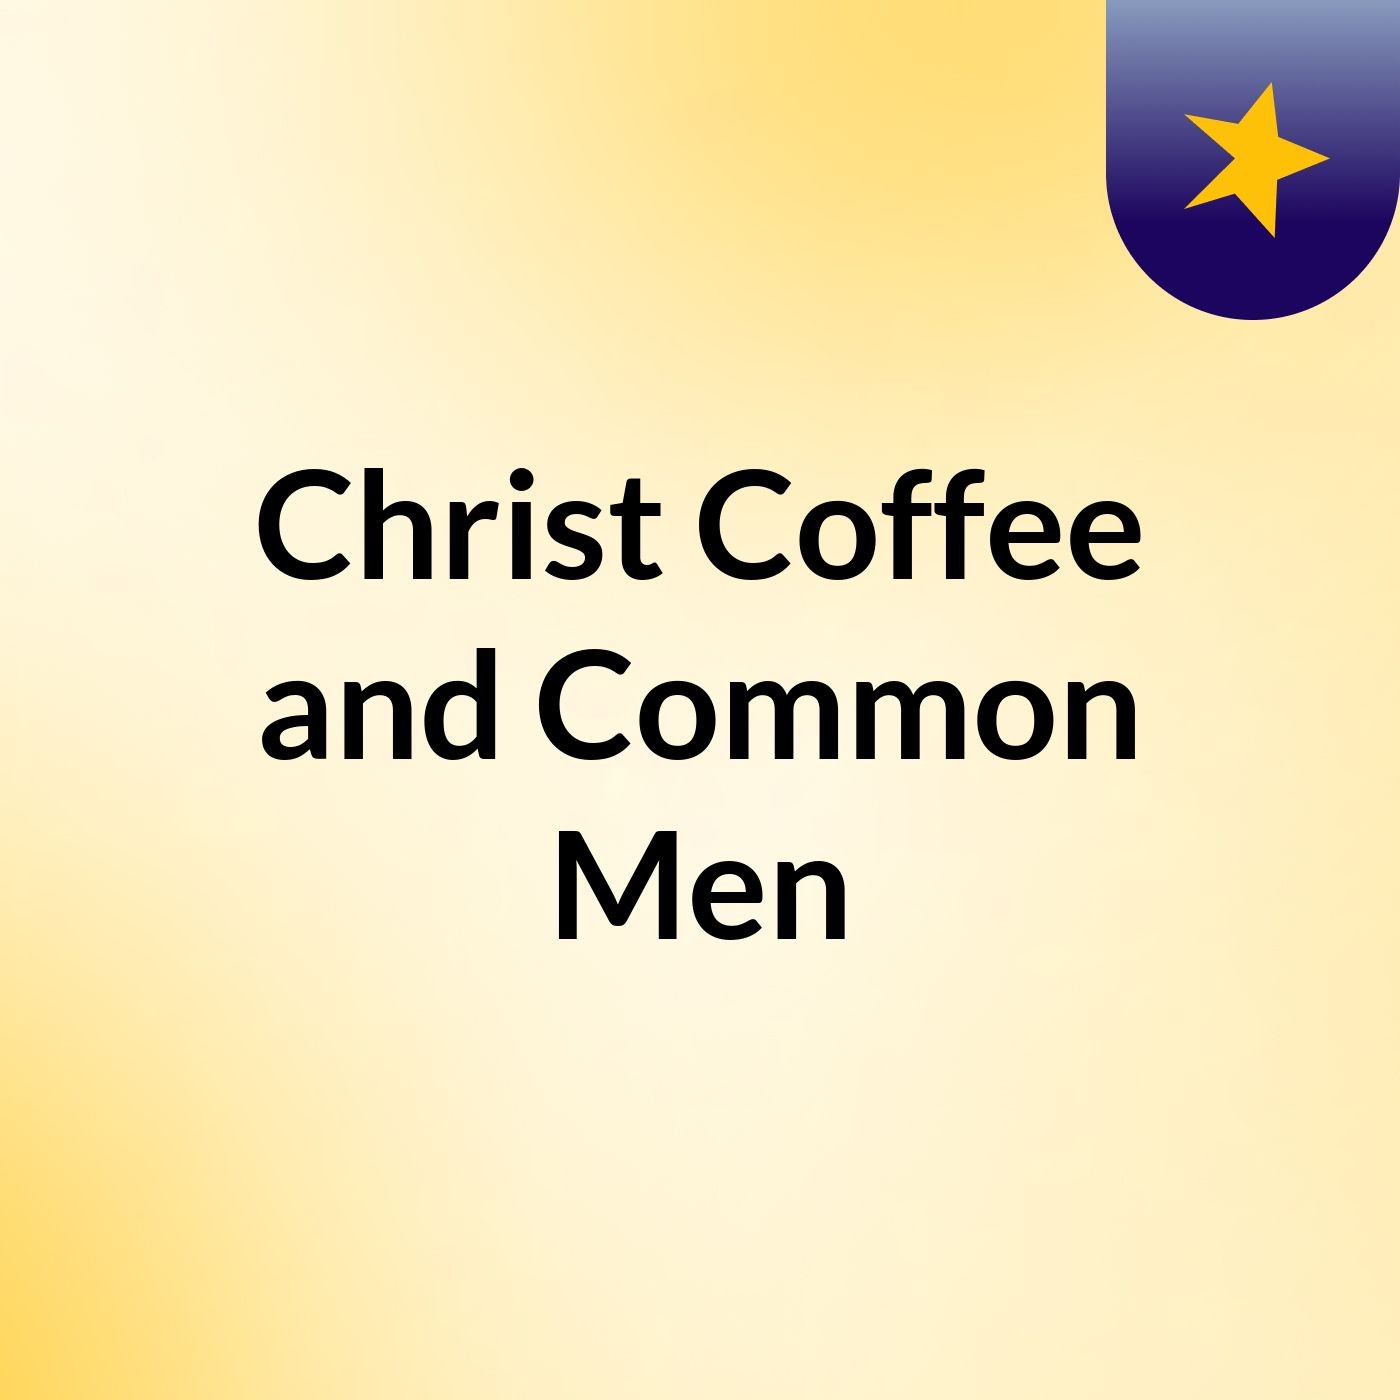 Christ, Coffee, and Common Men